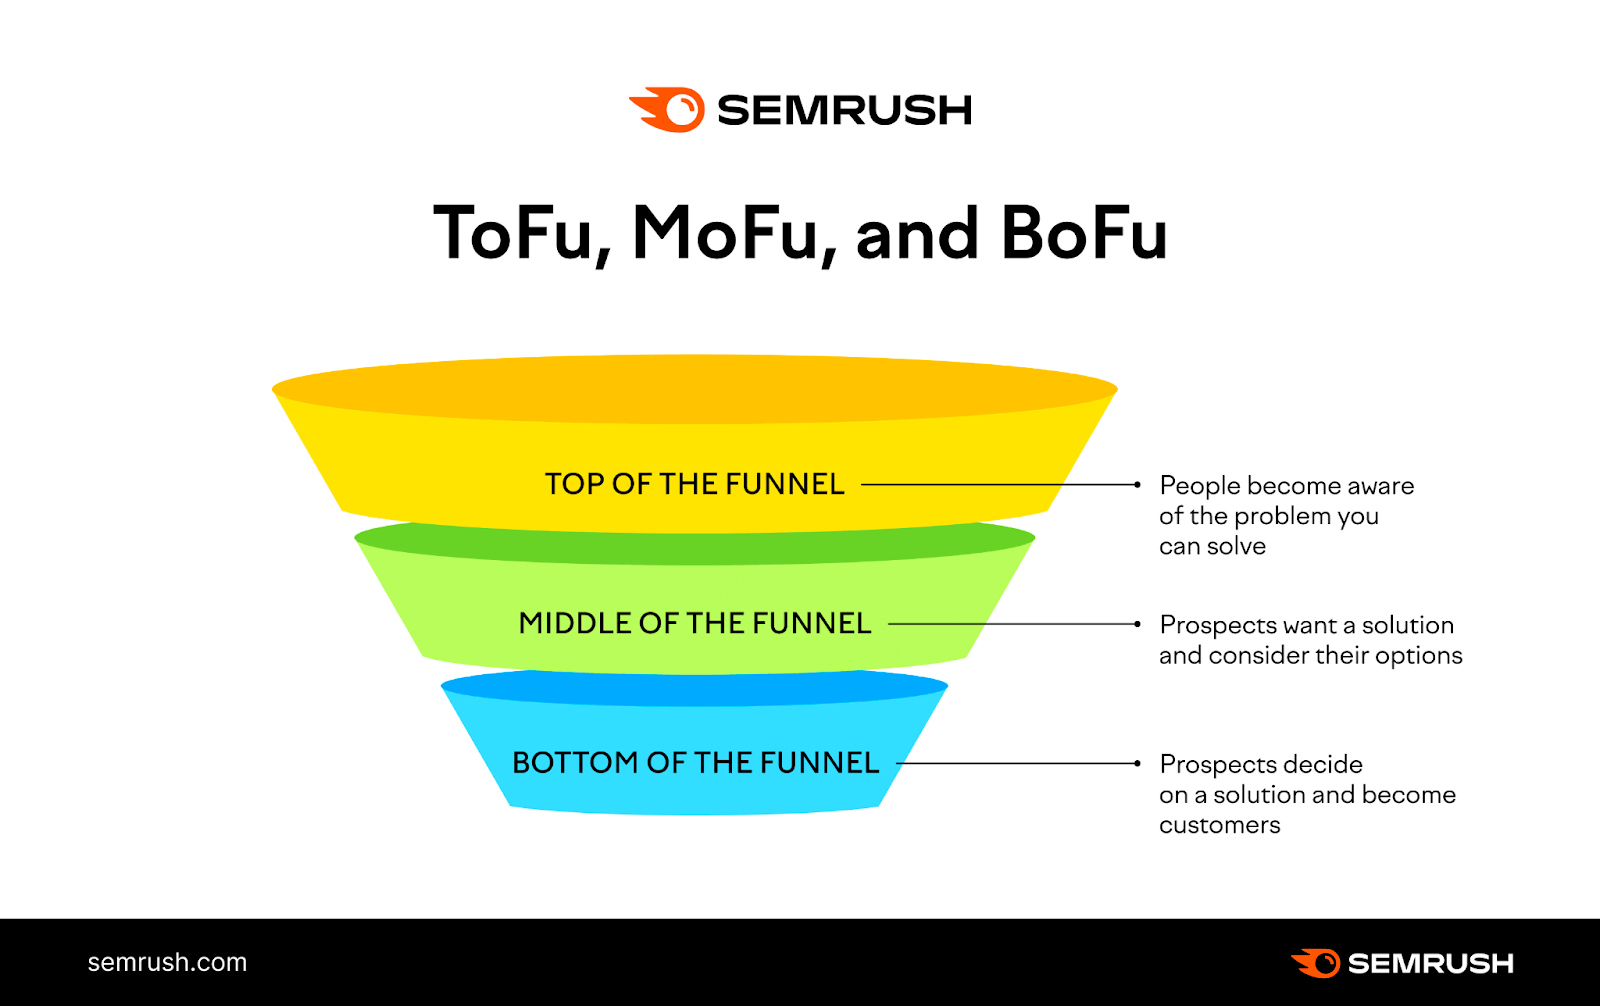 Top of funnel, middle of funnel, and bottom of funnel with awareness at the top, consideration in the middle, and decision at the bottom of the funnel